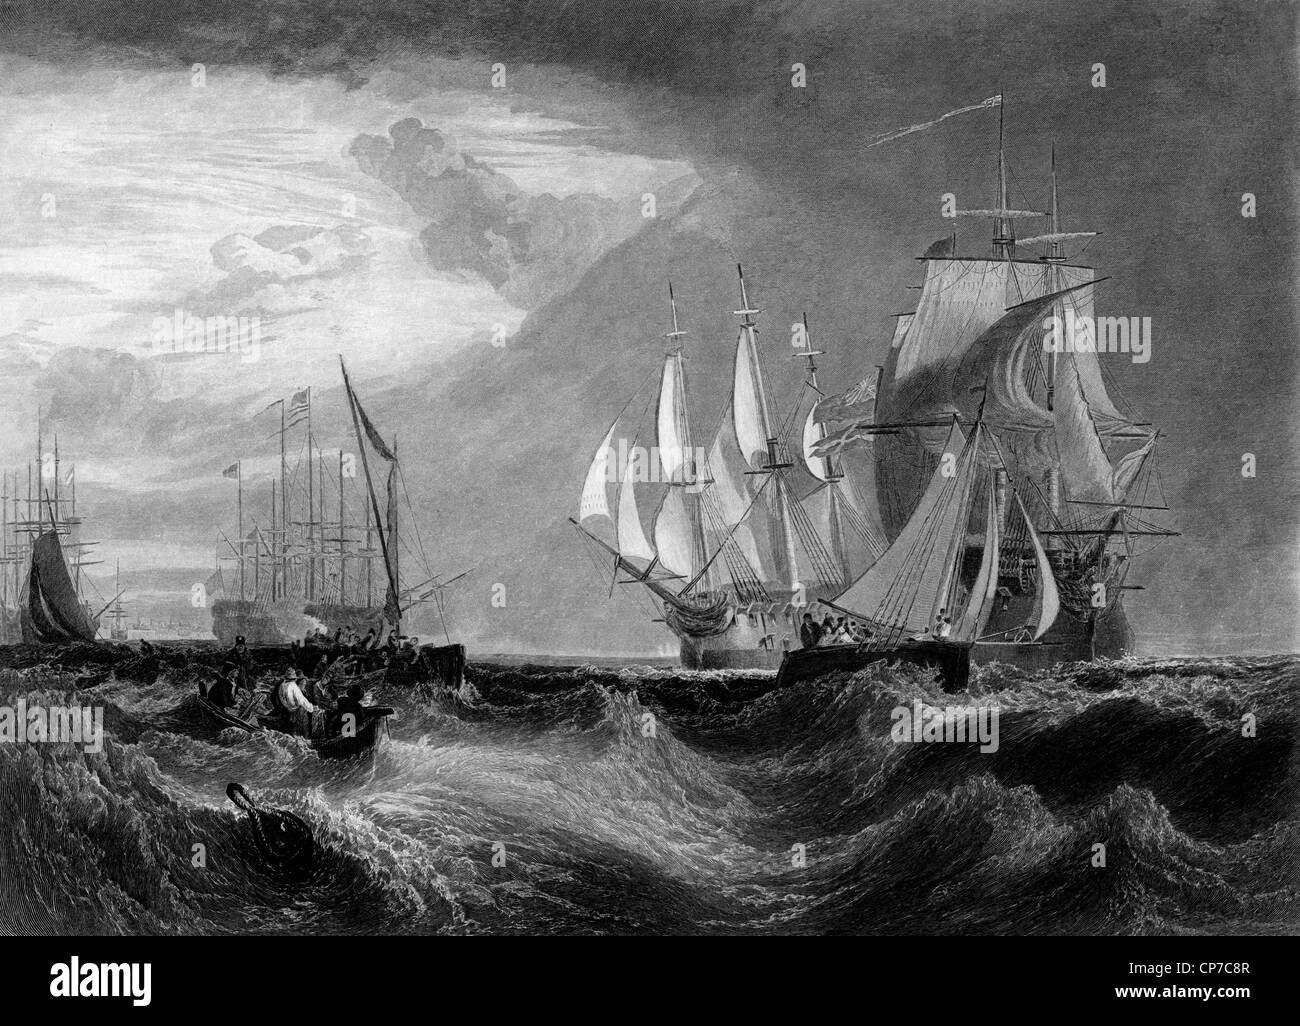 Illustration of British Naval fleet at annual Spithead Royal review. Engraved by William Miller in 1875. Stock Photo